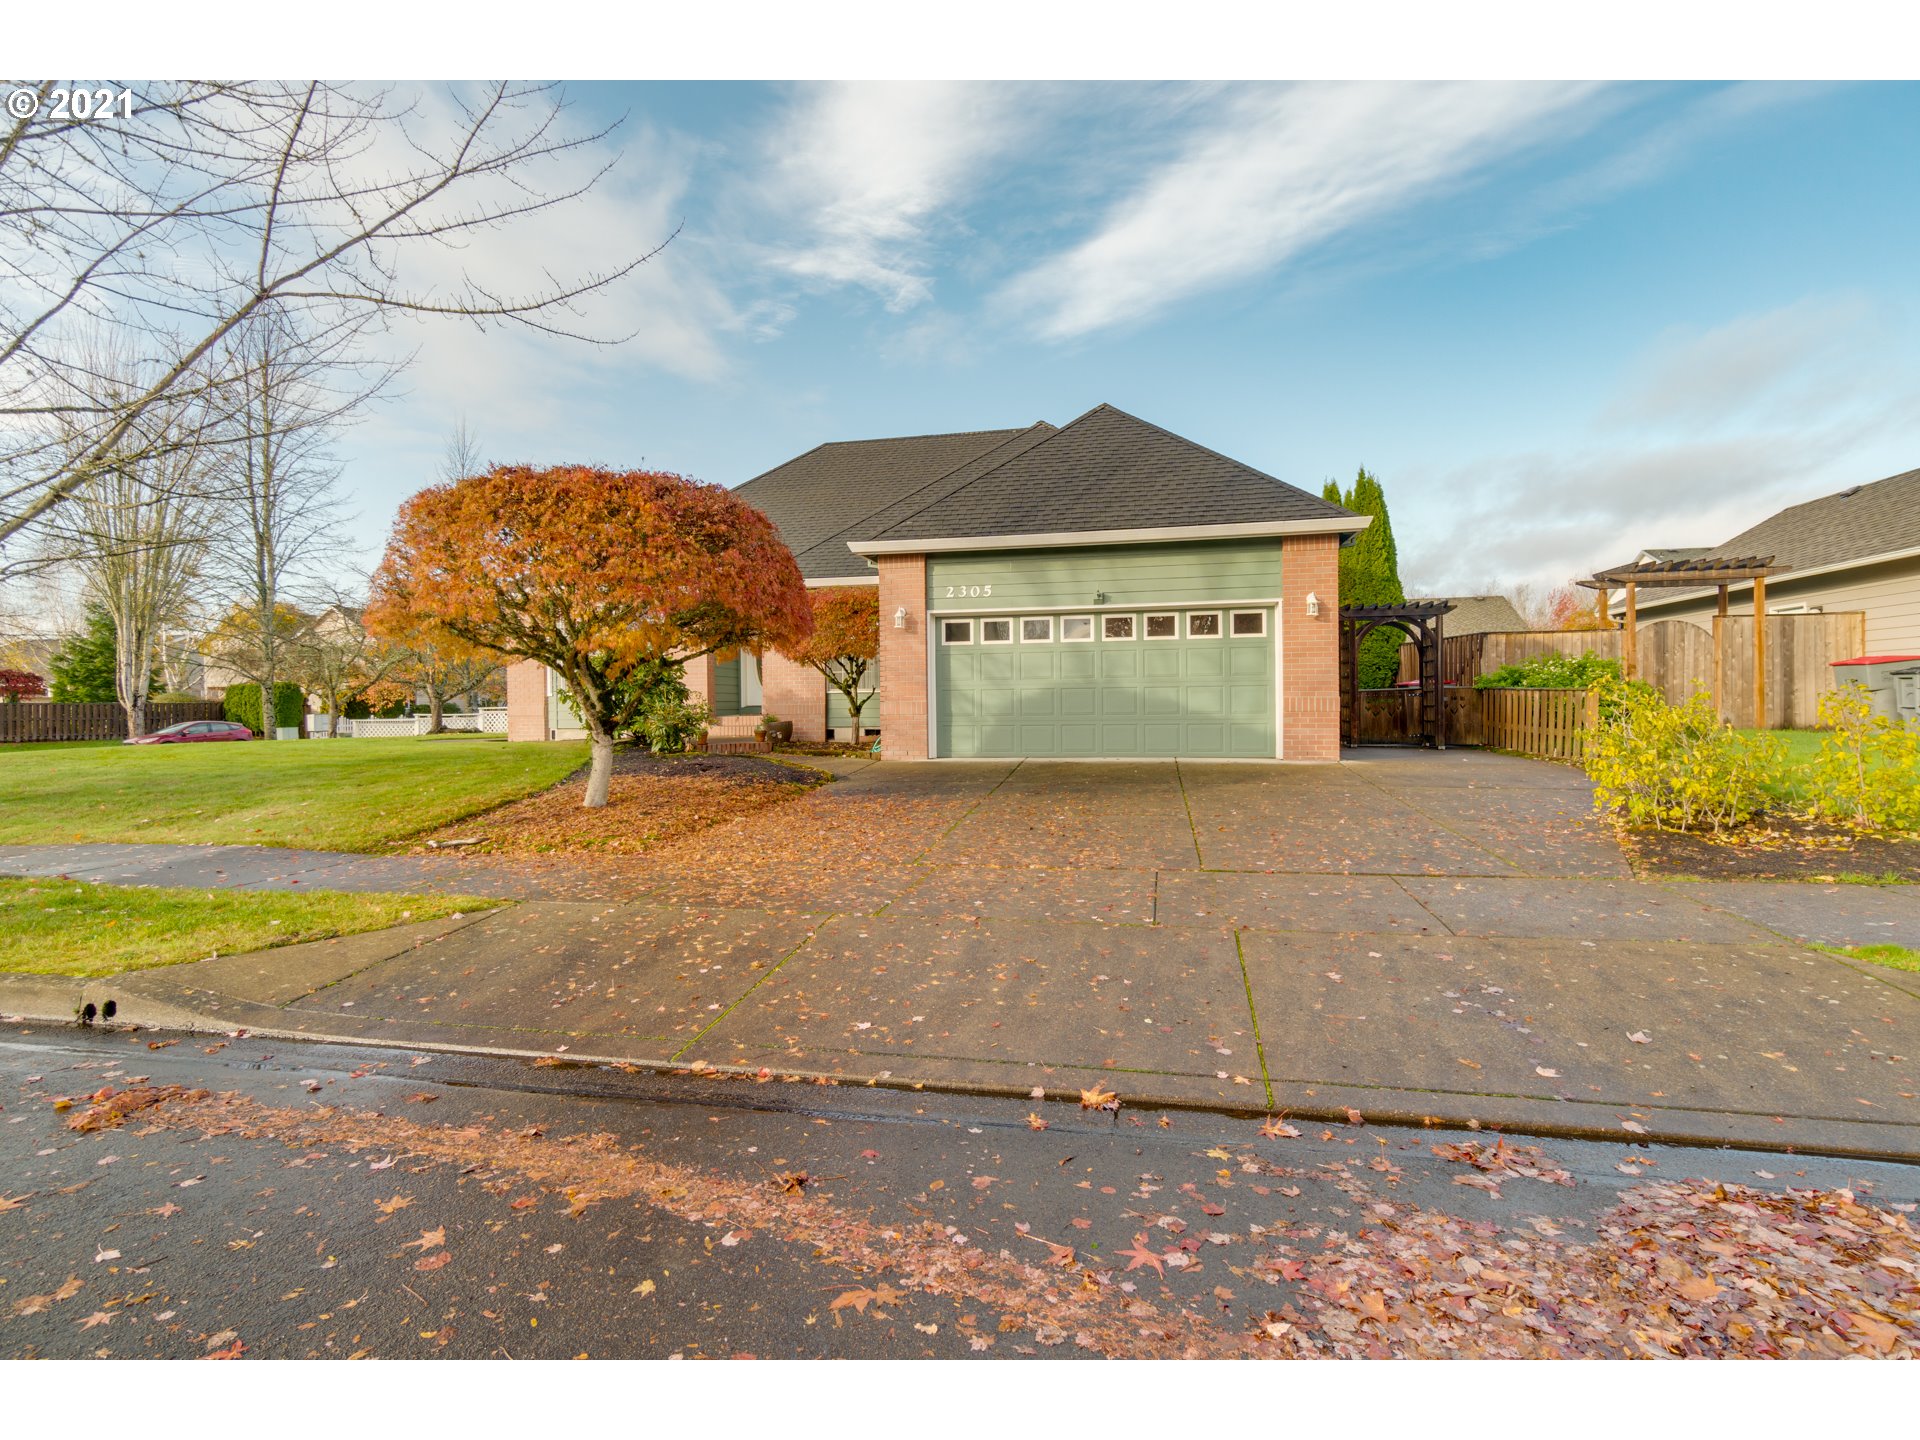 2305 NW SHADDEN DR (1 of 32)